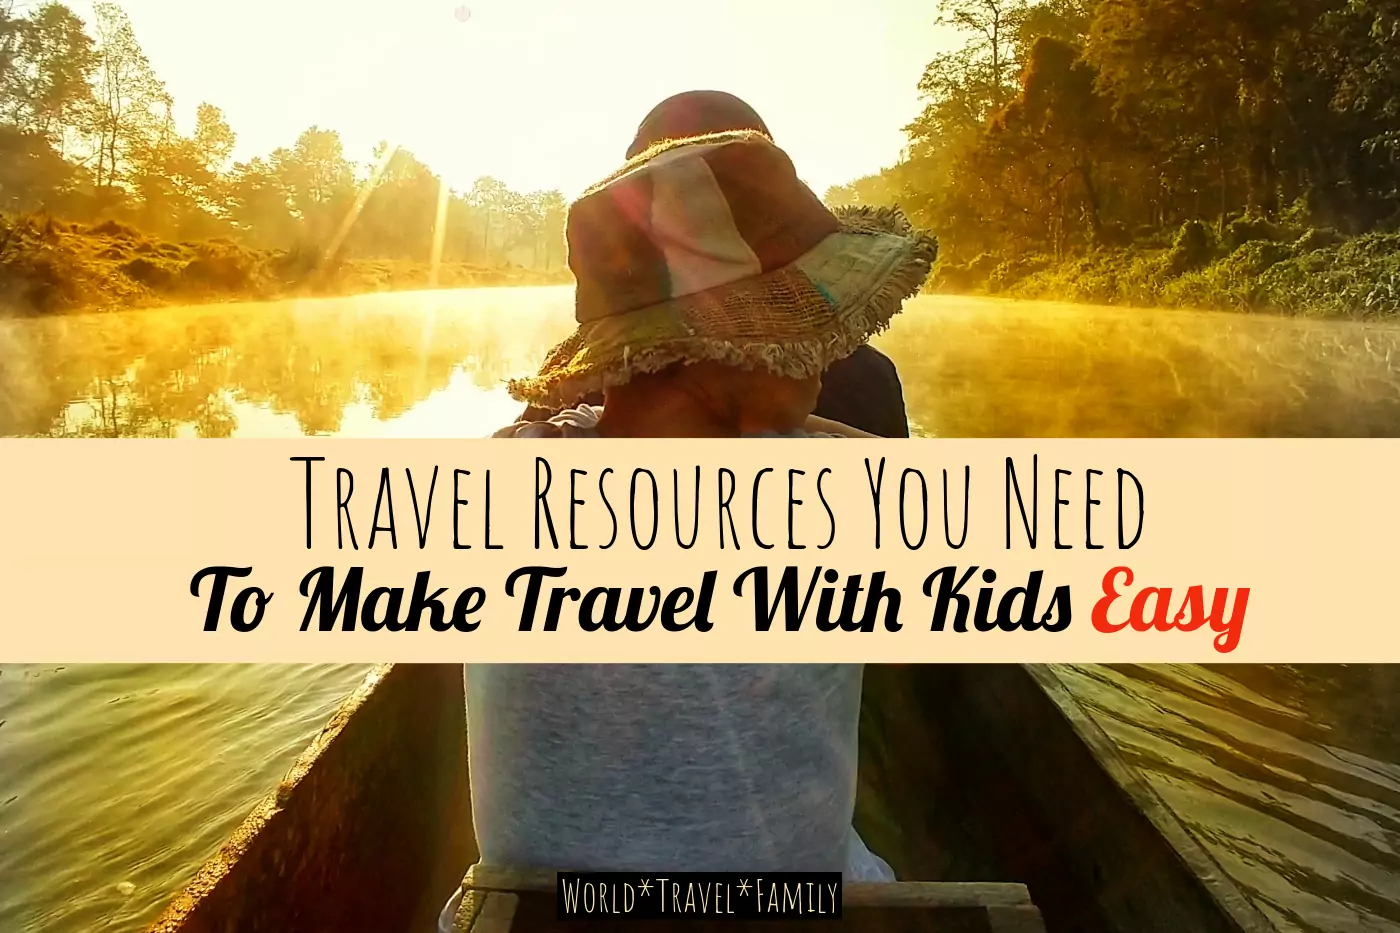 Travel Resources for easier travel